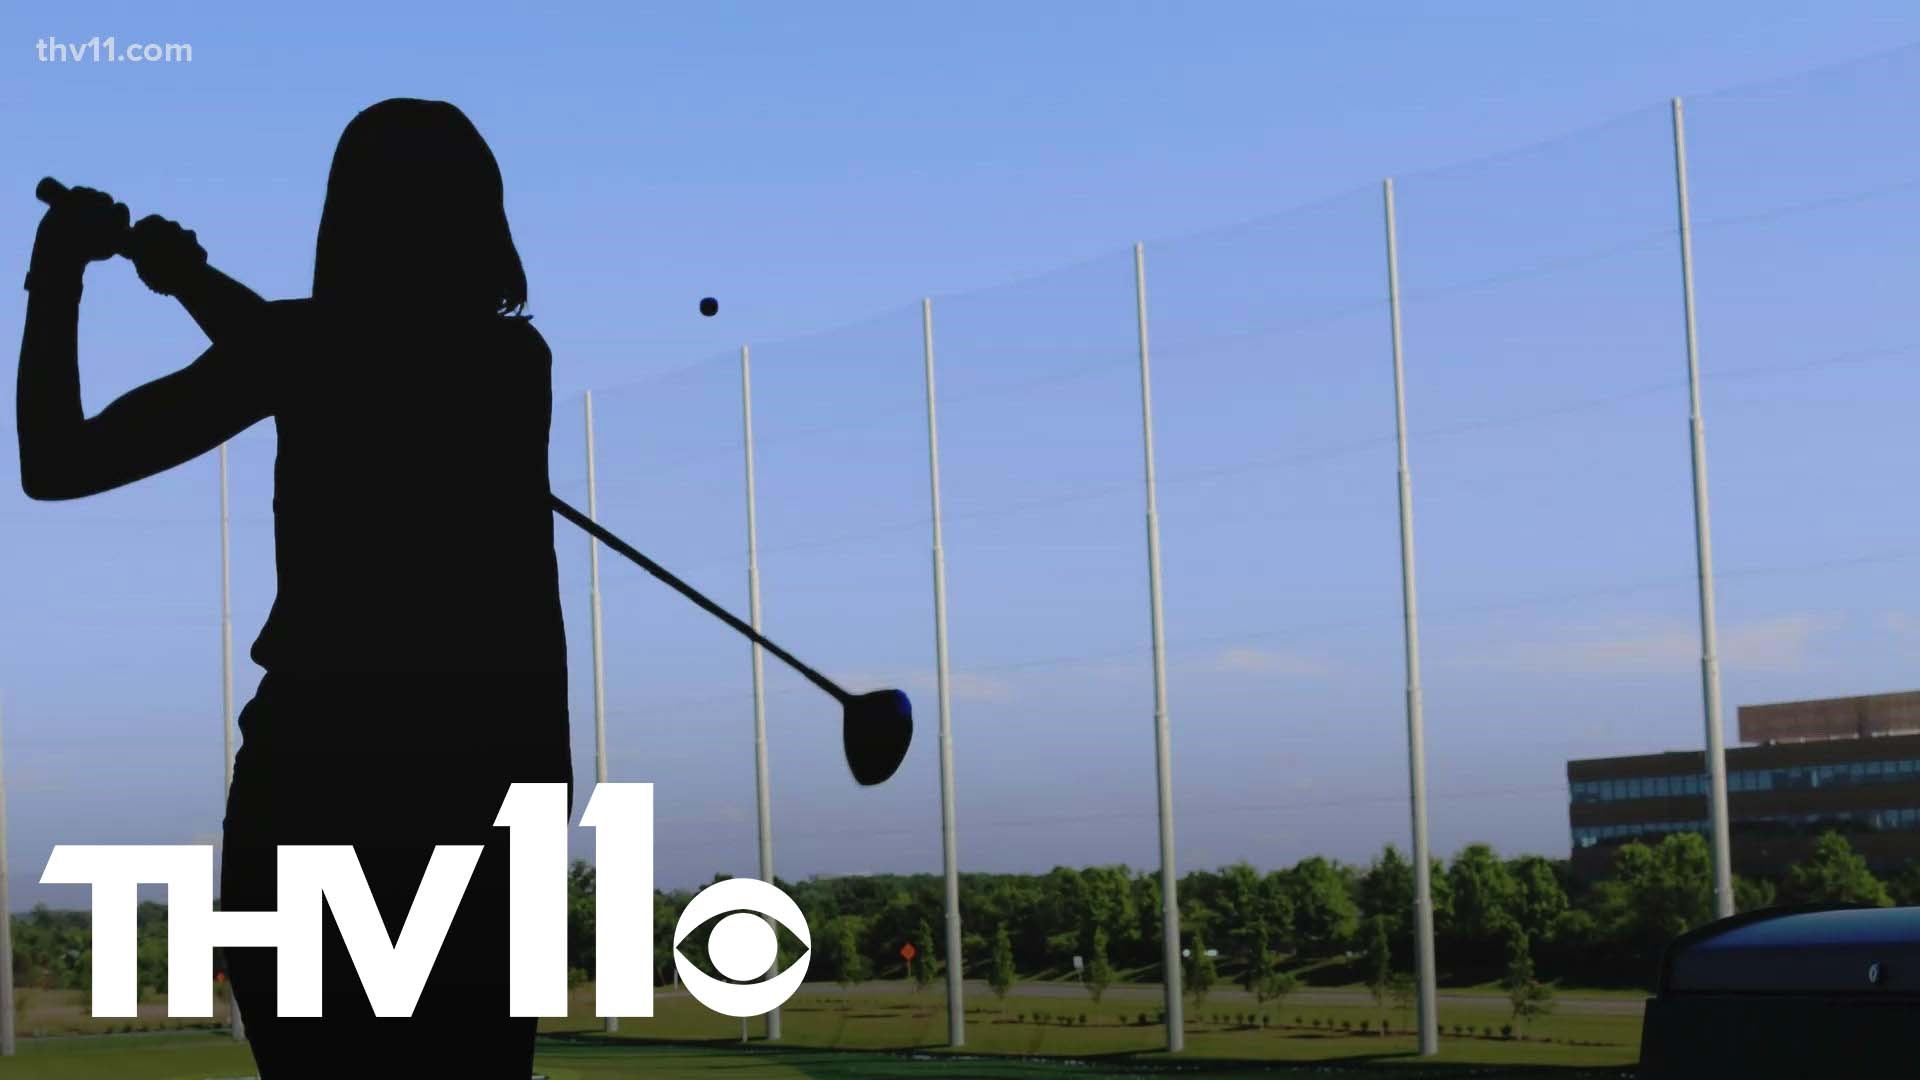 Mayor Frank Scott Jr. made the announcement that Top Golf will be coming to Little Rock, and the new facility could benefit the city economically.